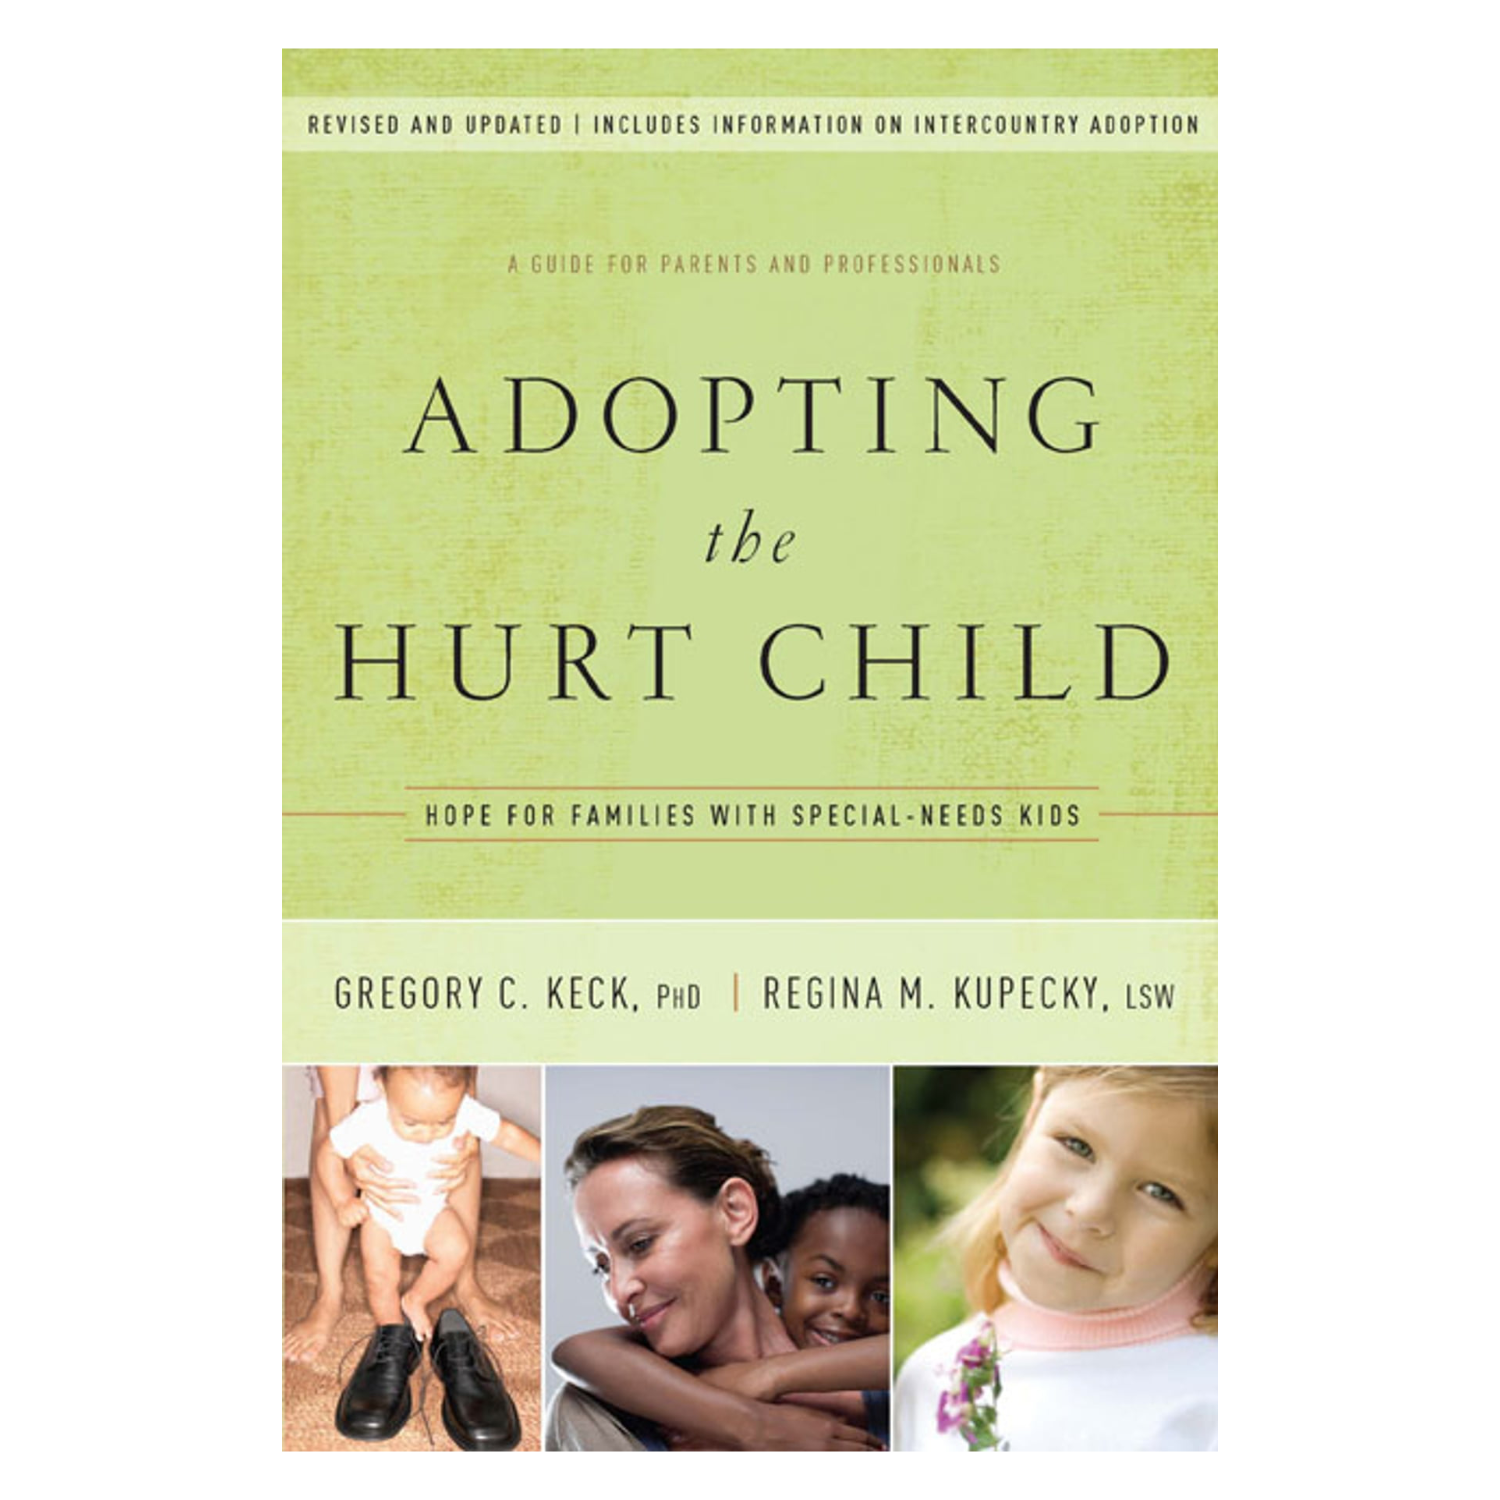 Adopting the Hurt Child: Hope for Families With Special-Needs Kids